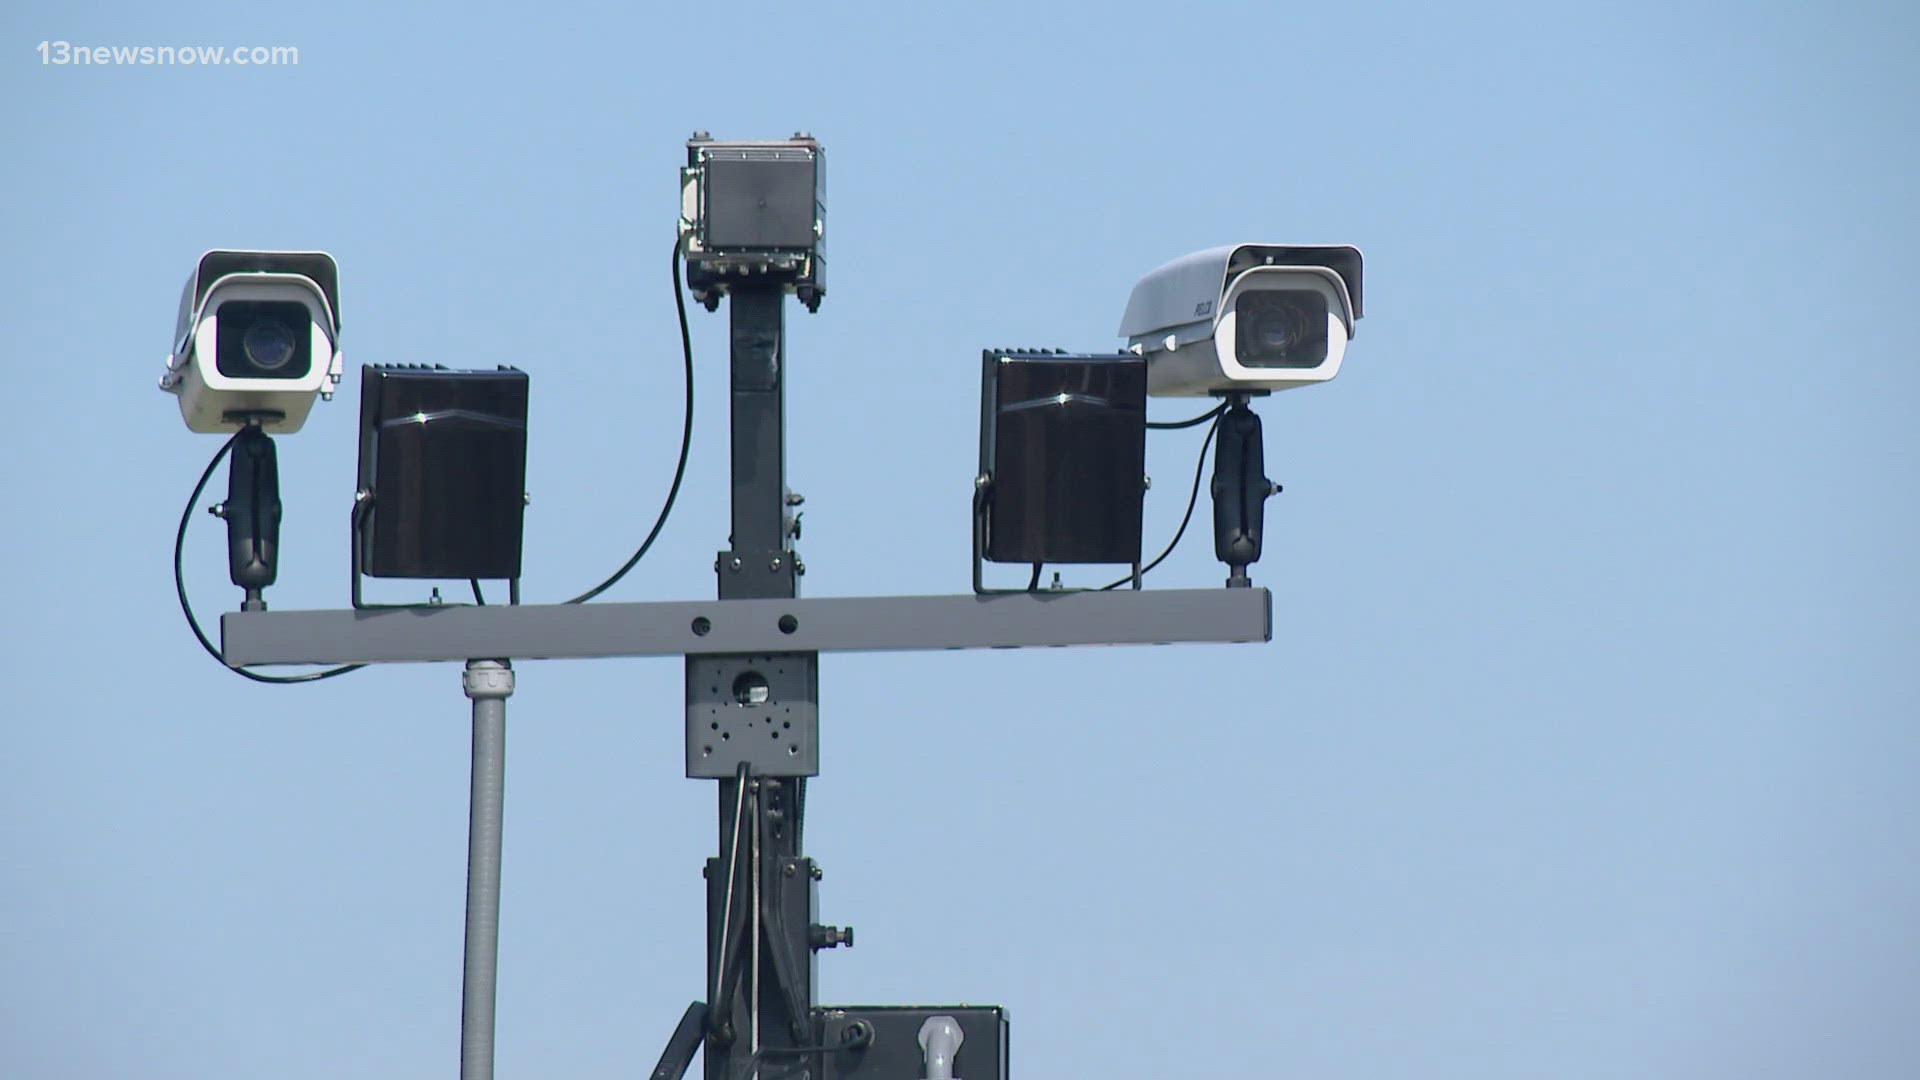 Portsmouth police hope newly installed red light cameras get drivers to stop running through lights. Drivers are already being warned to stop at red lights.